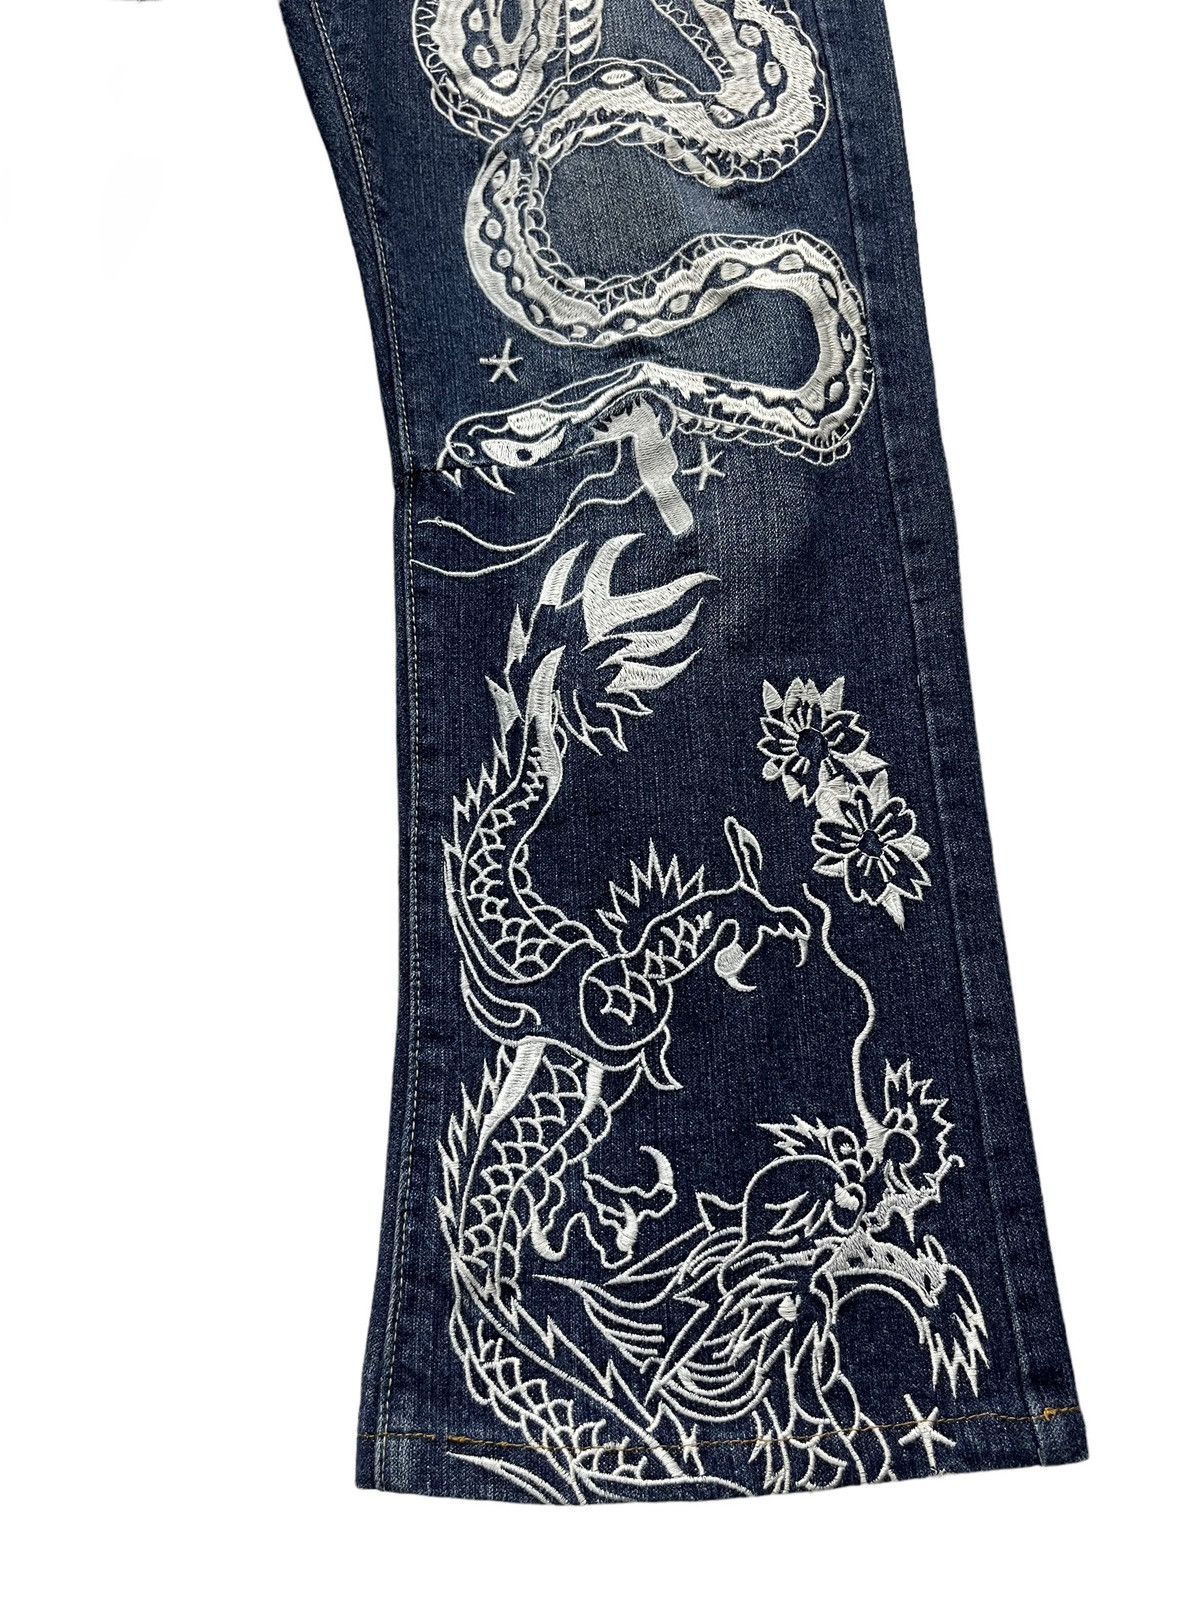 Ed Hardy BINDING NOW🔥ED HARDY Snake & Dragon Embroidered Tattoo Wear Size US 33 - 4 Thumbnail